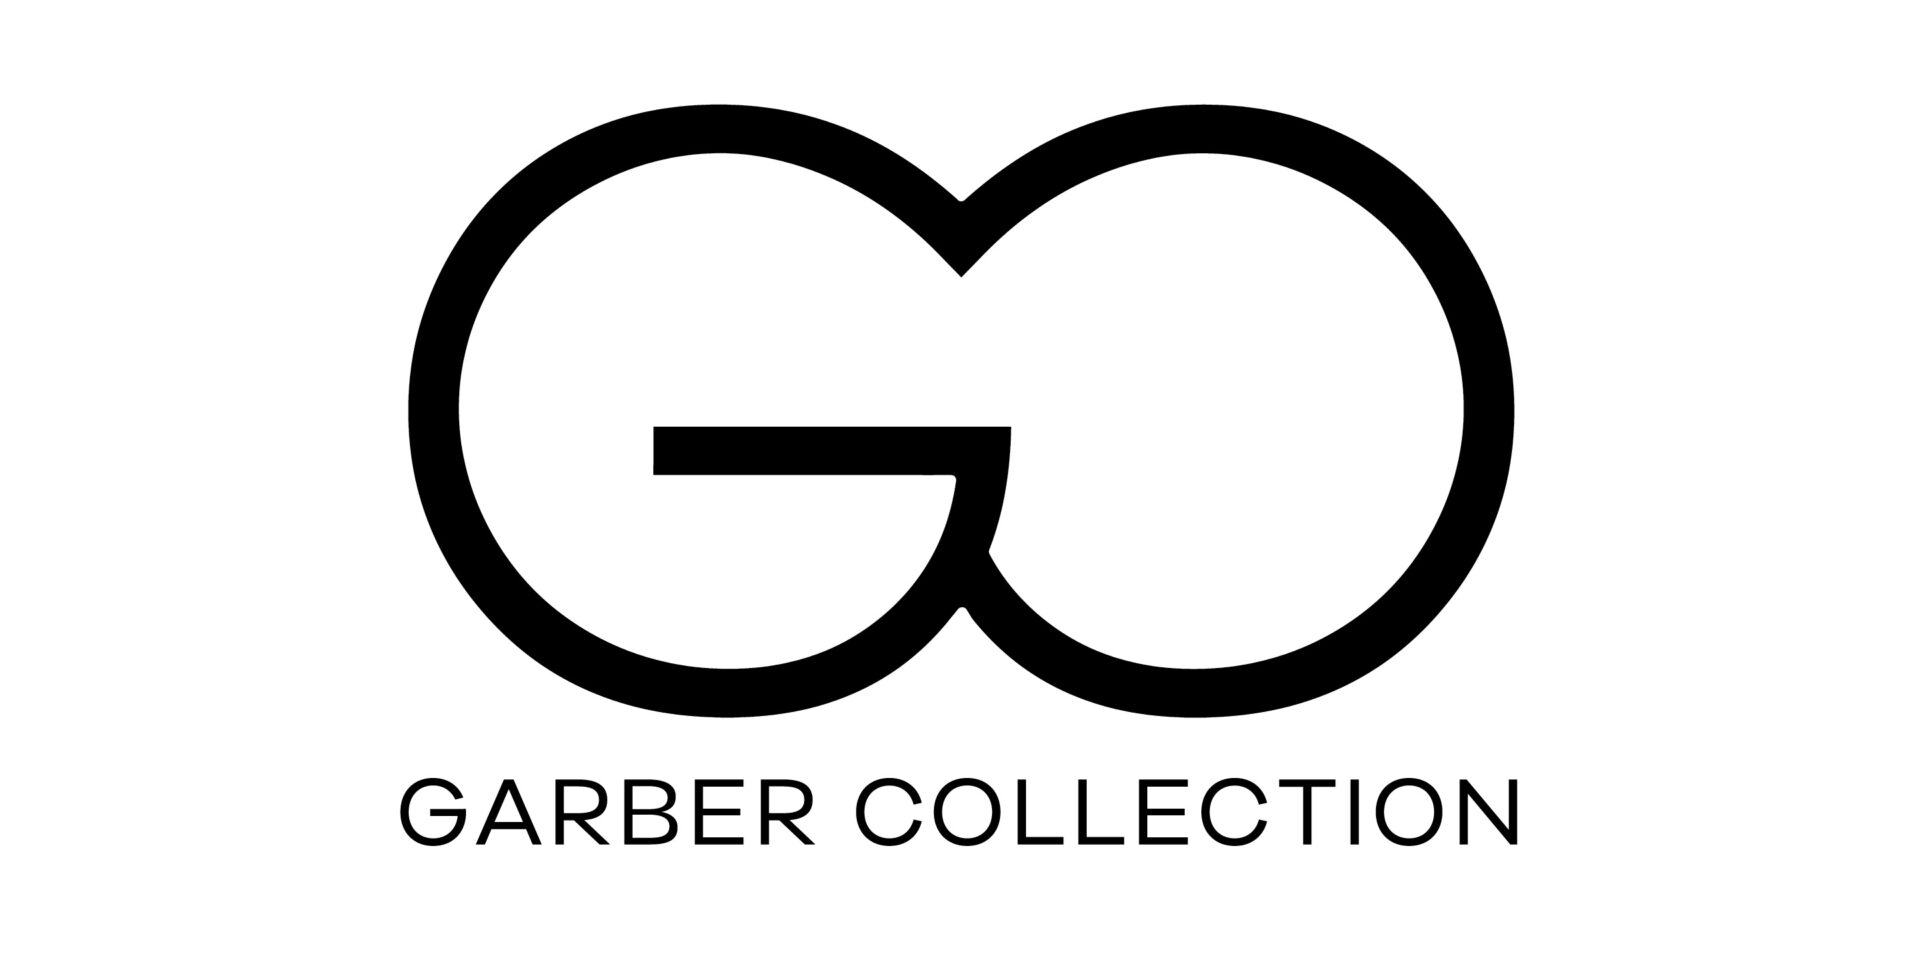 A black and white logo of the go barber collection.